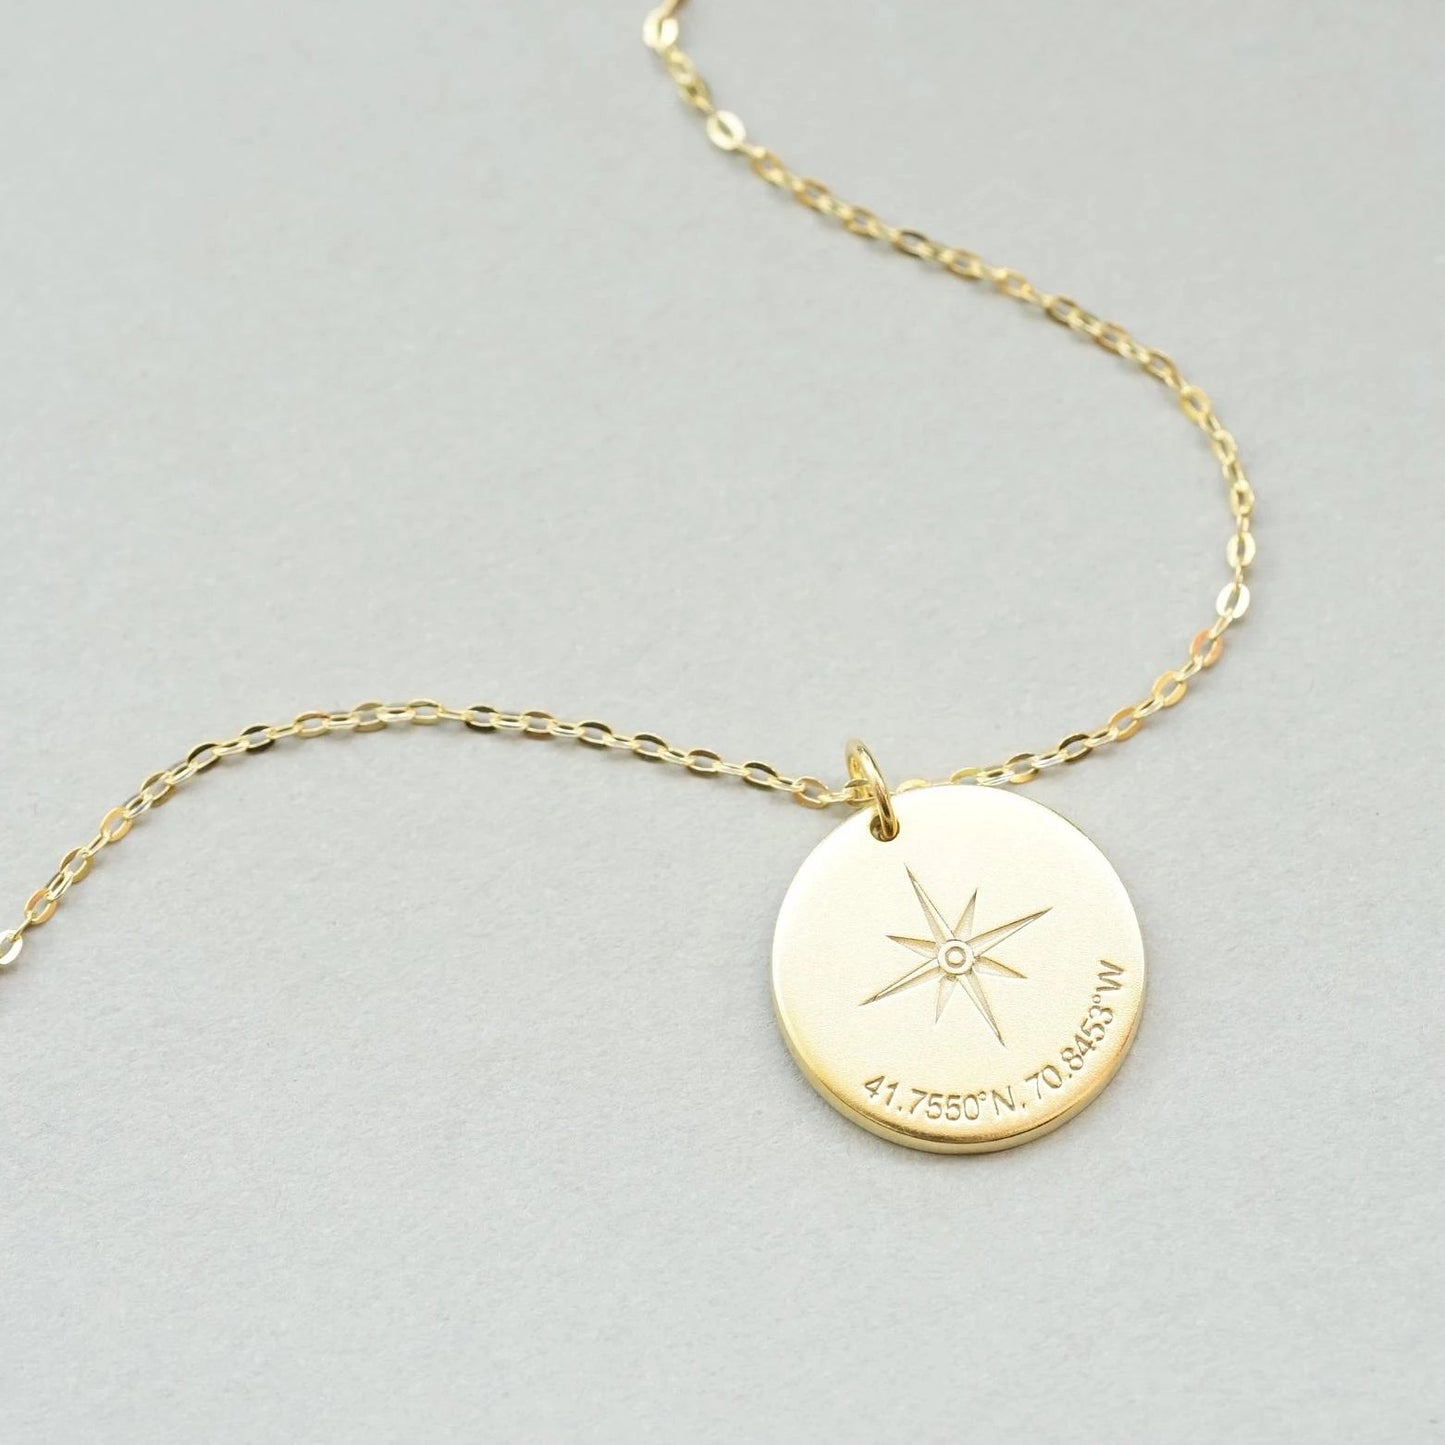 Personalized Compass Necklace